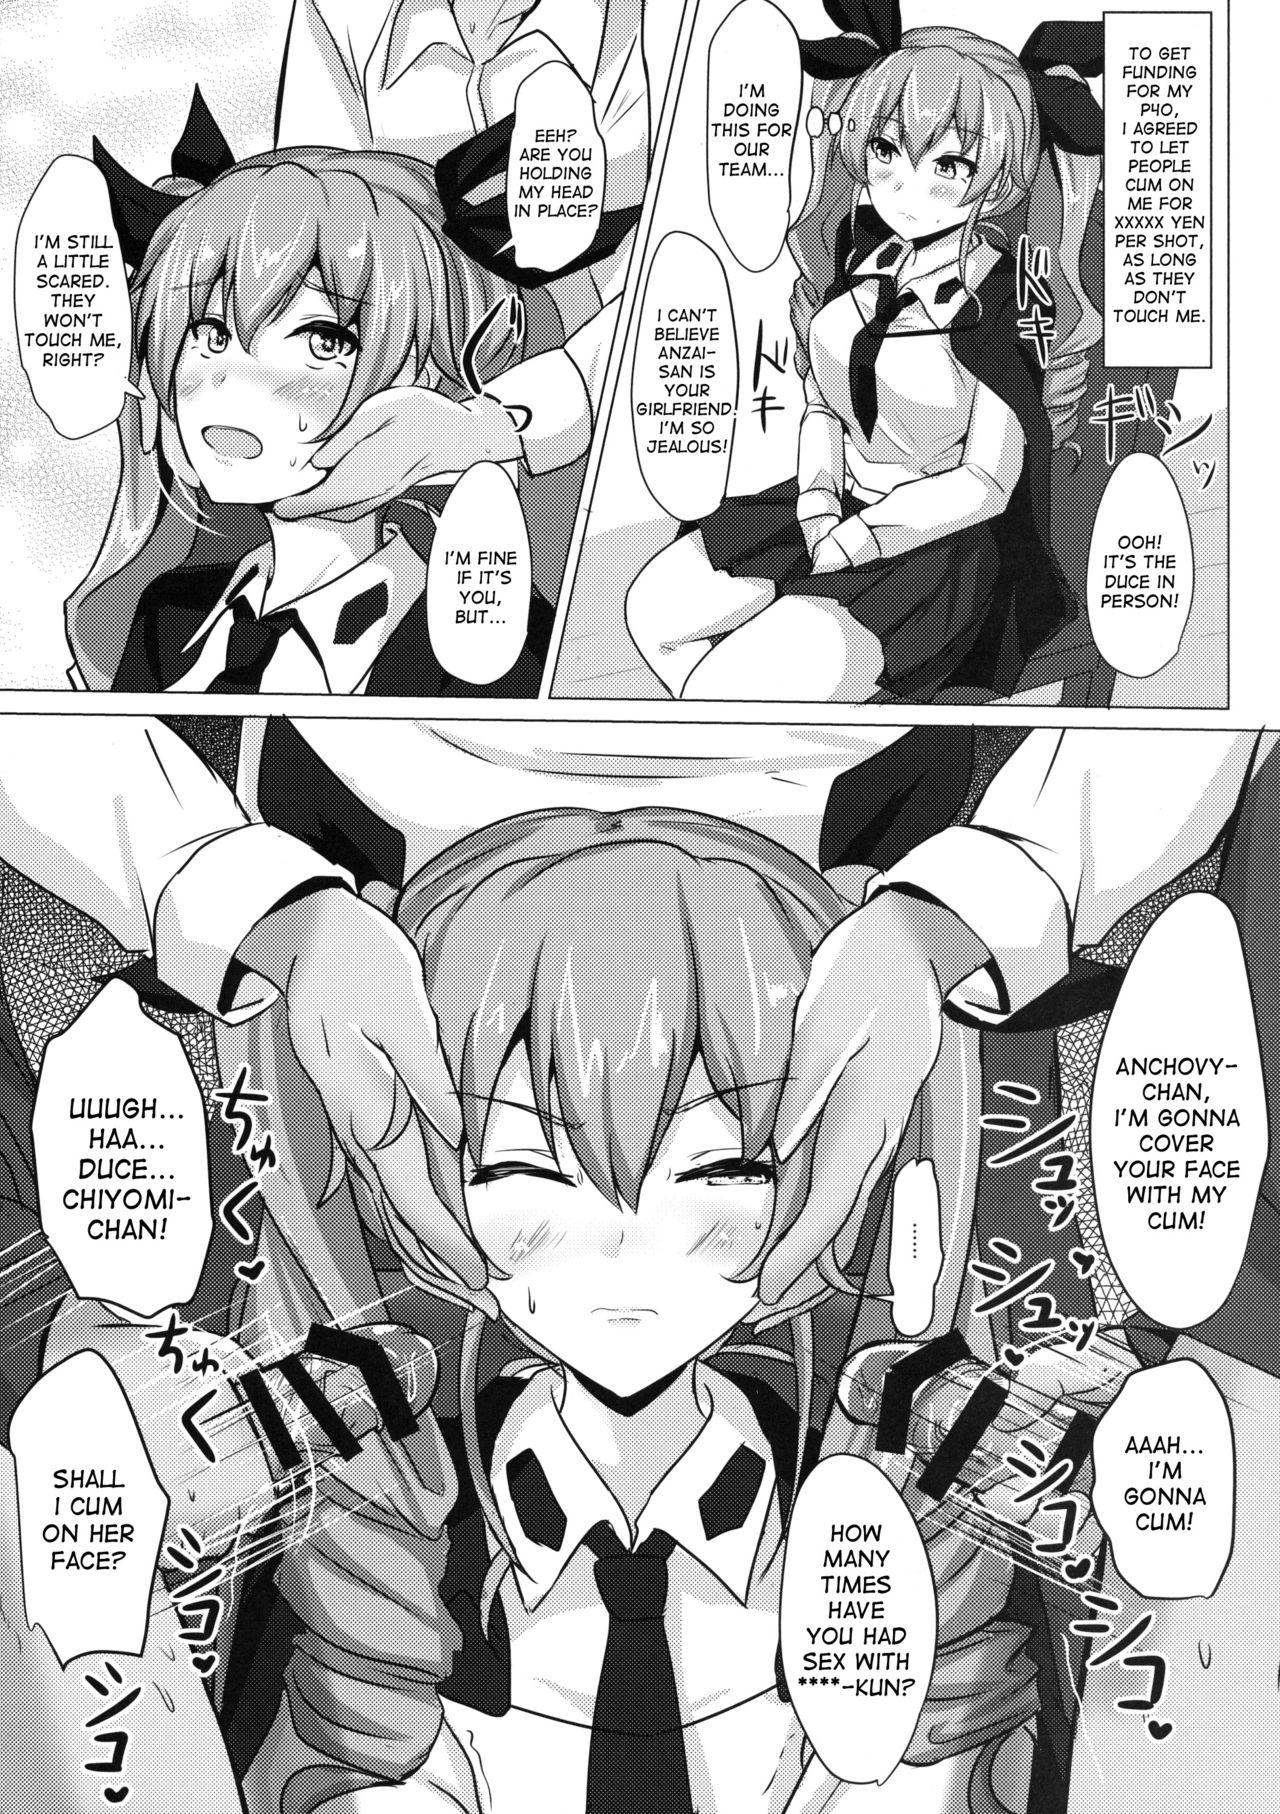 Gay Reality Anchovy Nee-san White Sauce Zoe - Girls und panzer Love Making - Page 7